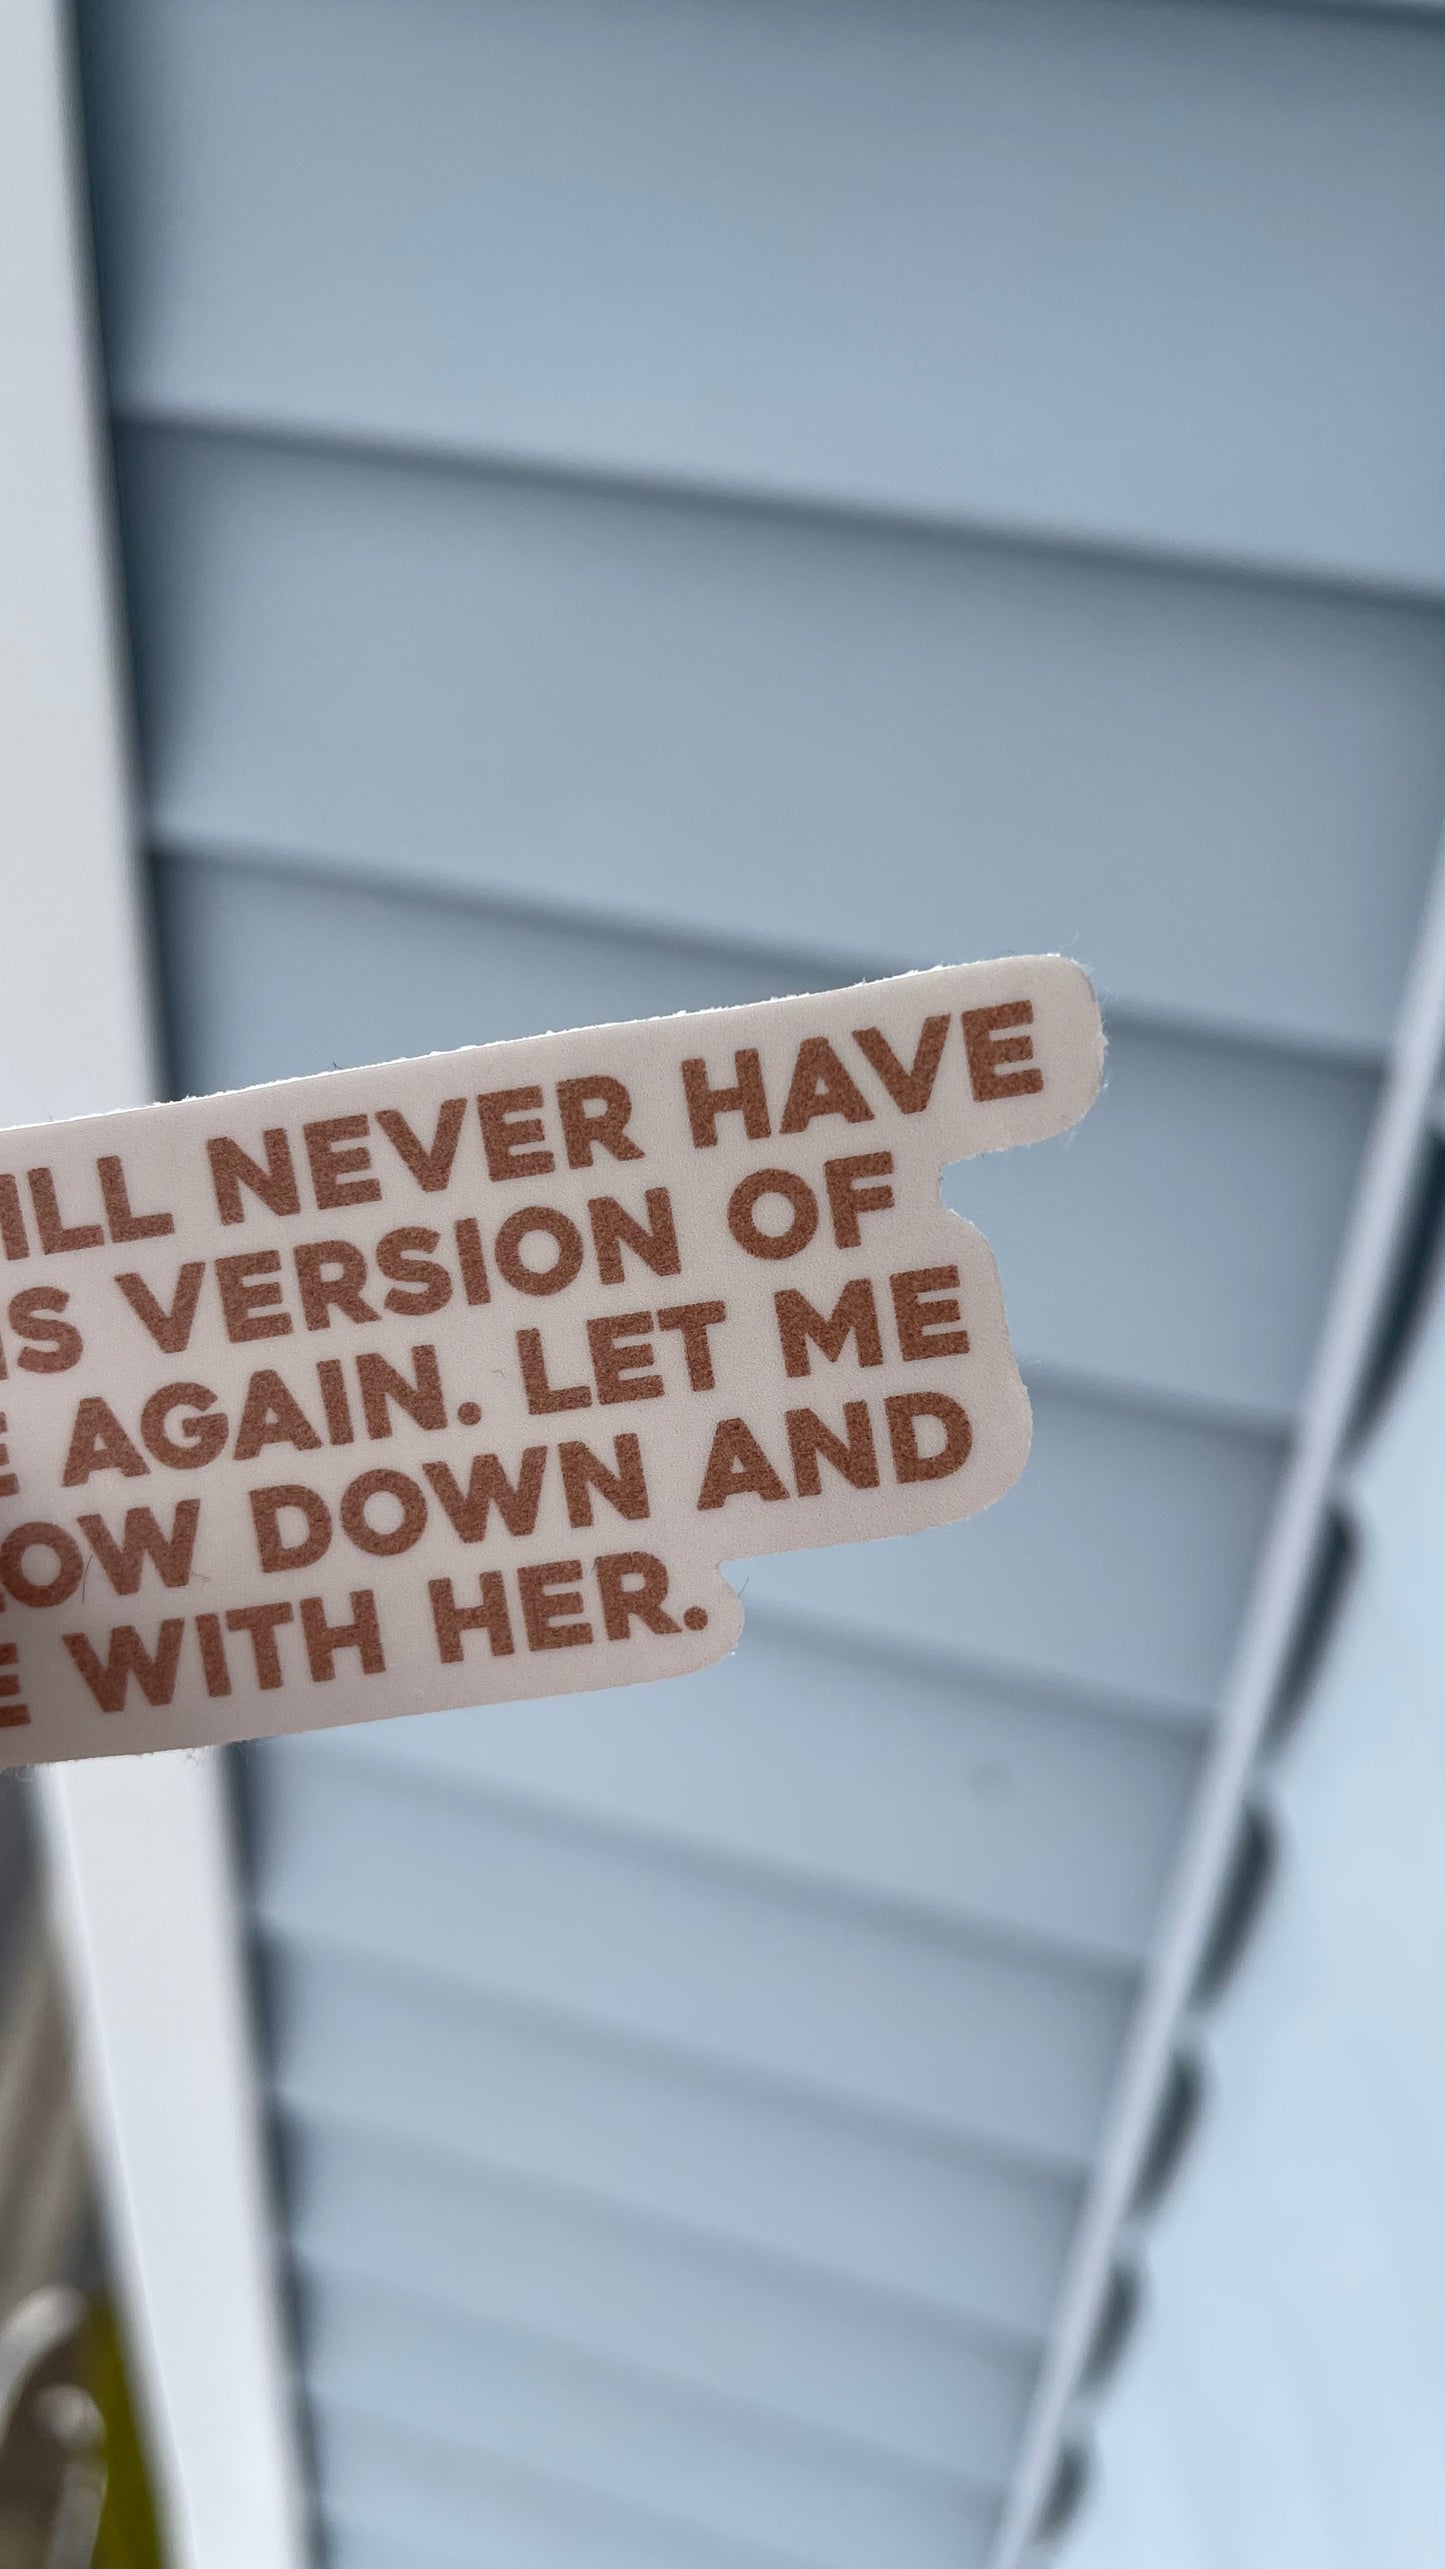 I will never have this version of me again. Let me slow down + be with her. - Sticker